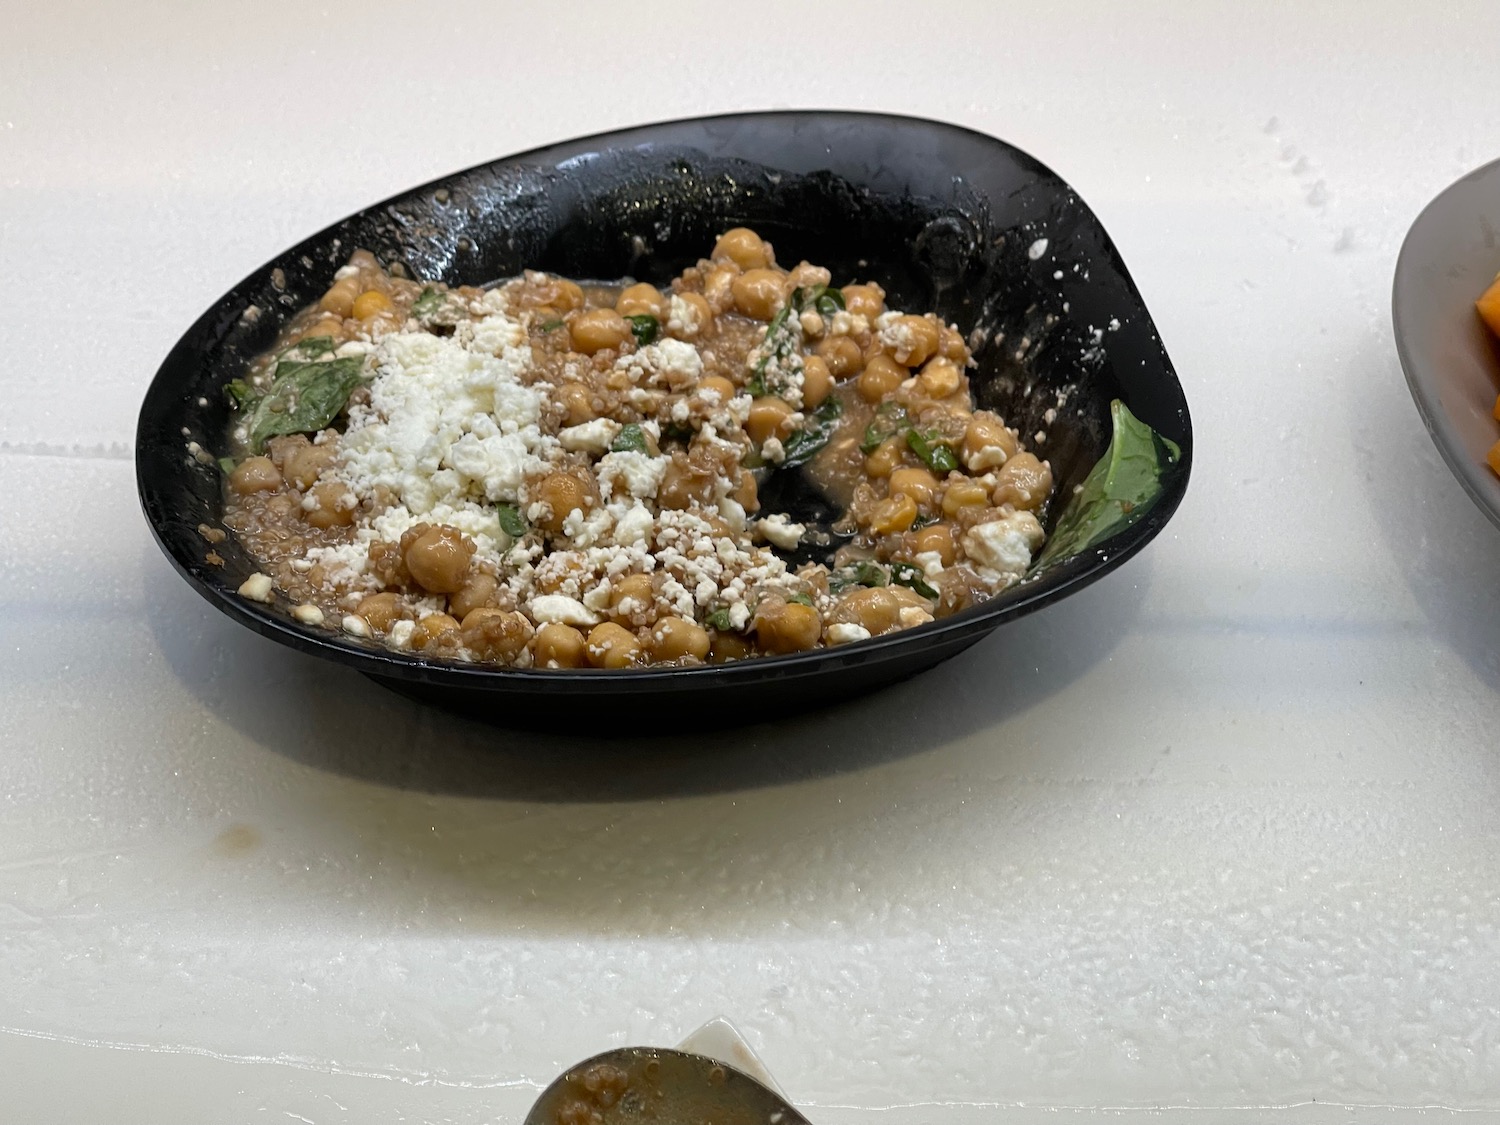 a bowl of food on a white surface